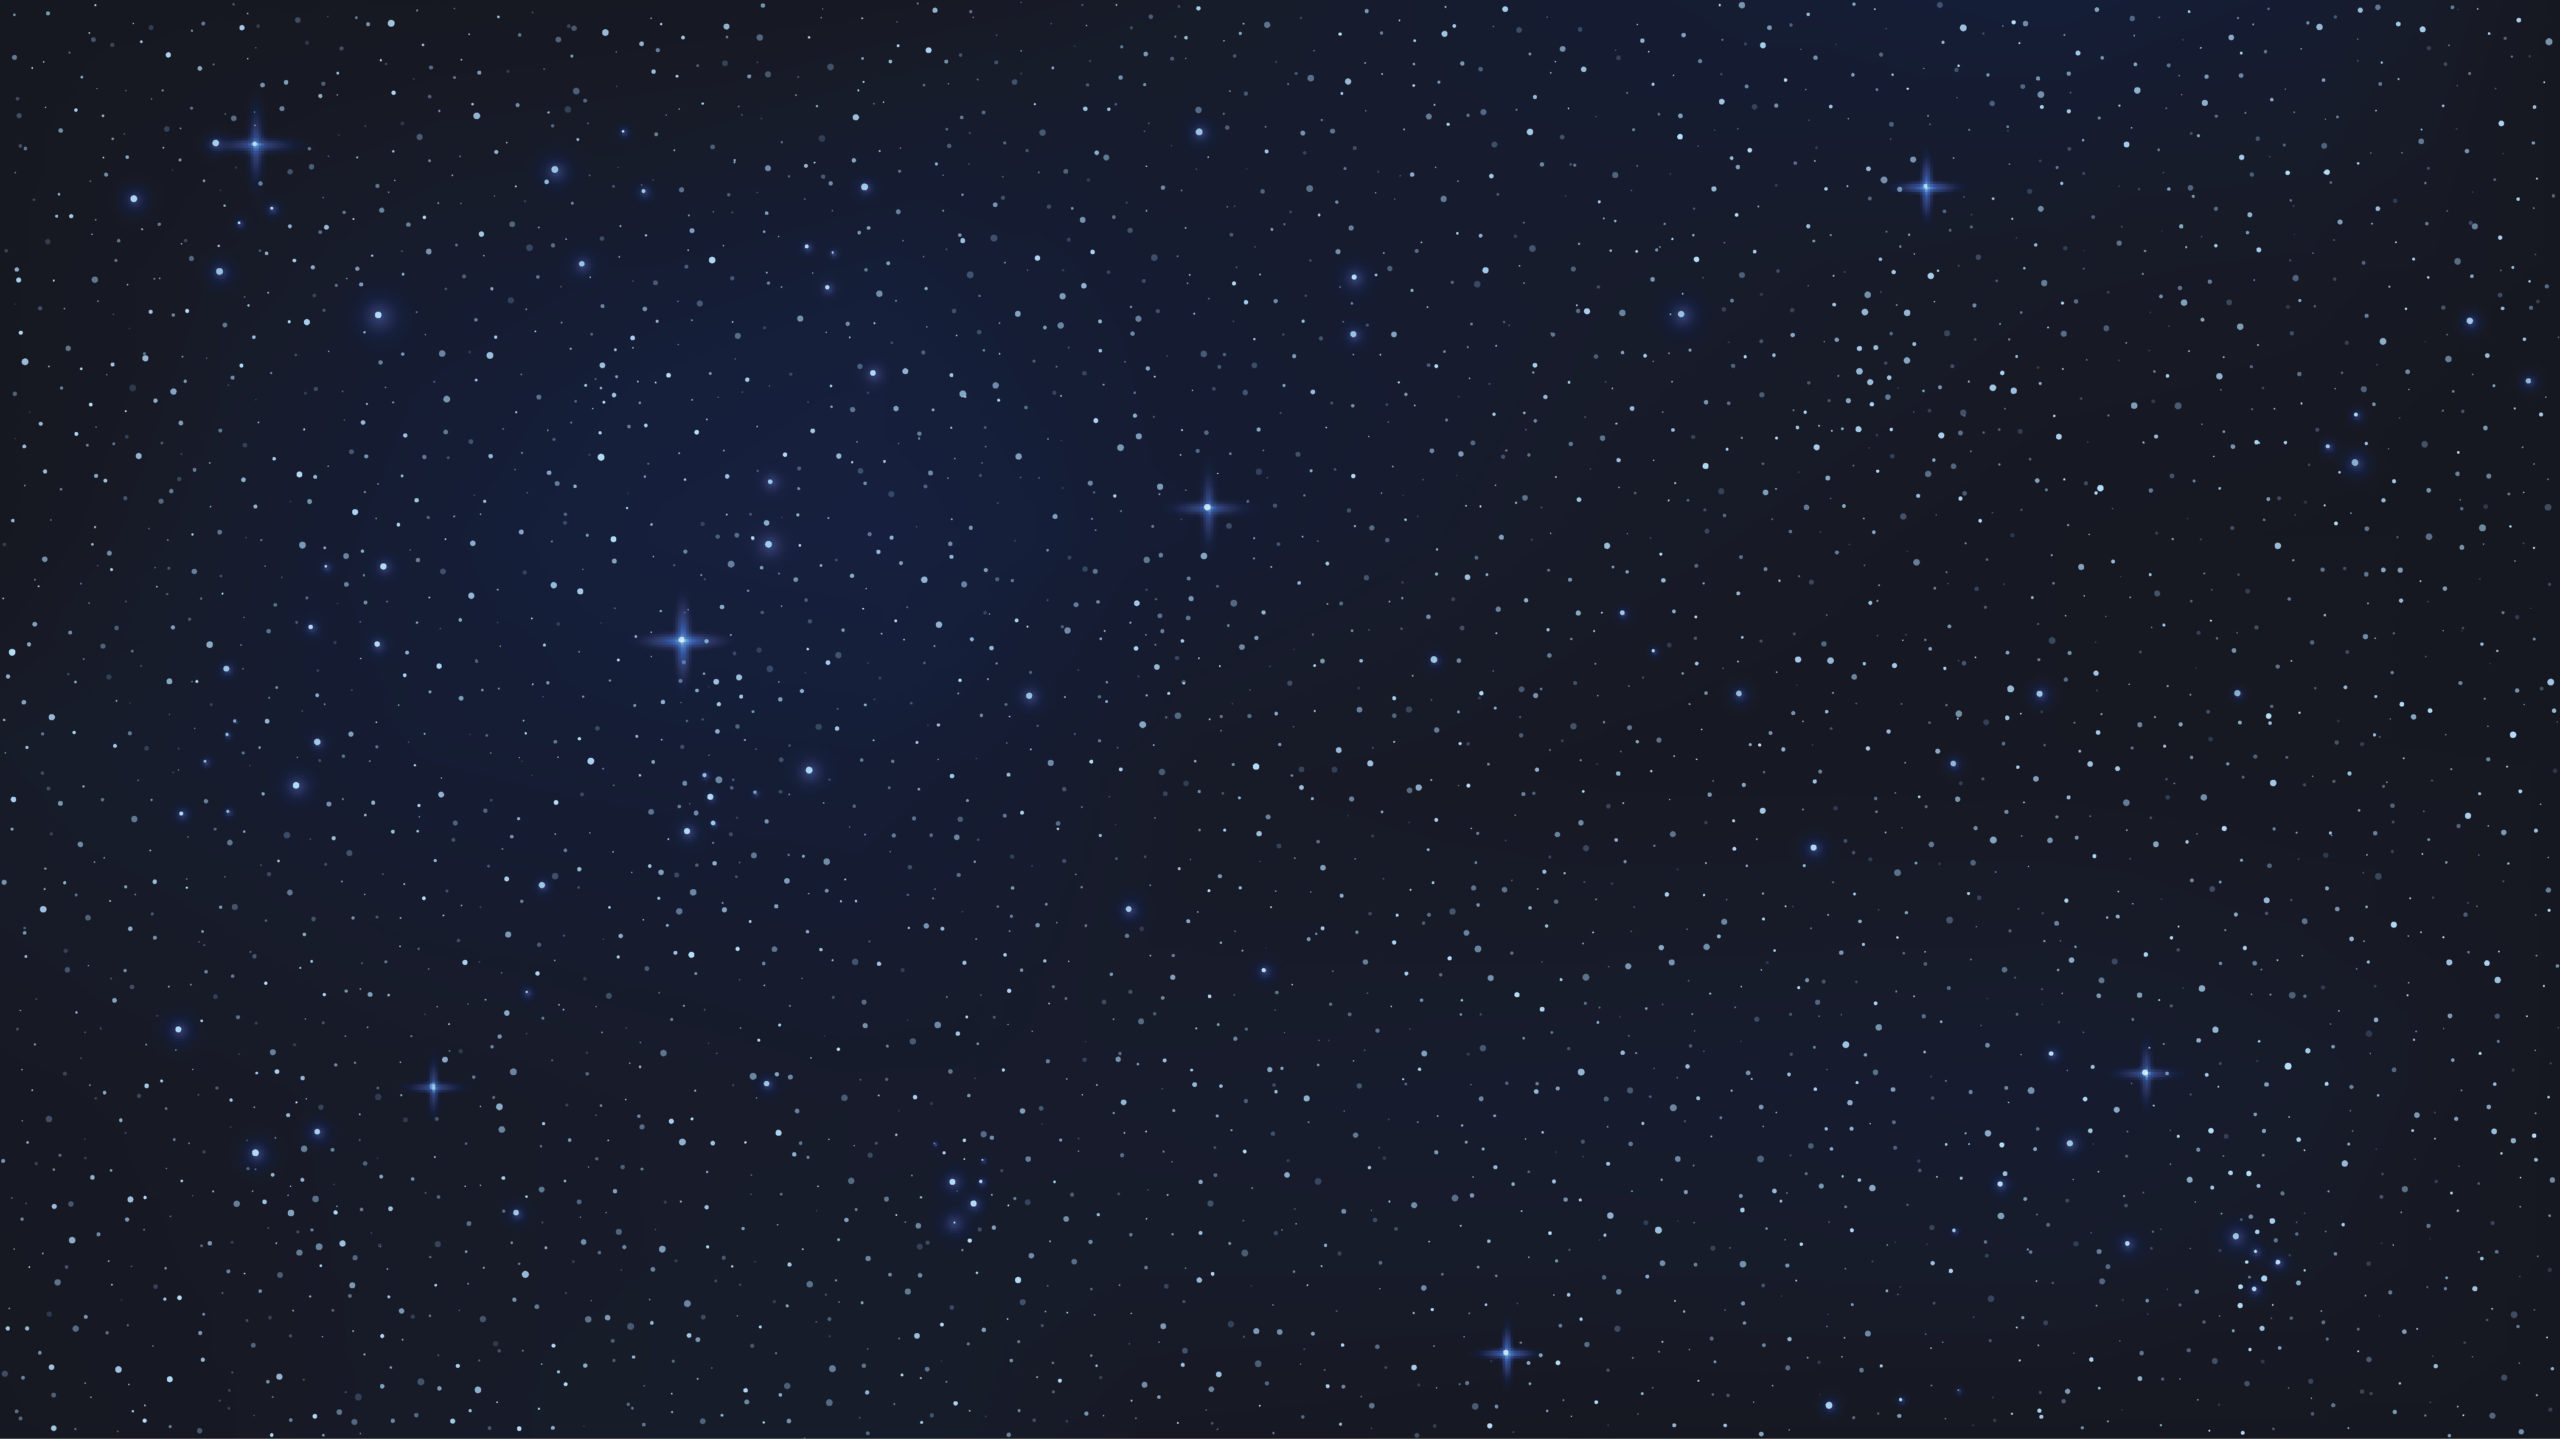 Magical background sky stars images for dreamy design